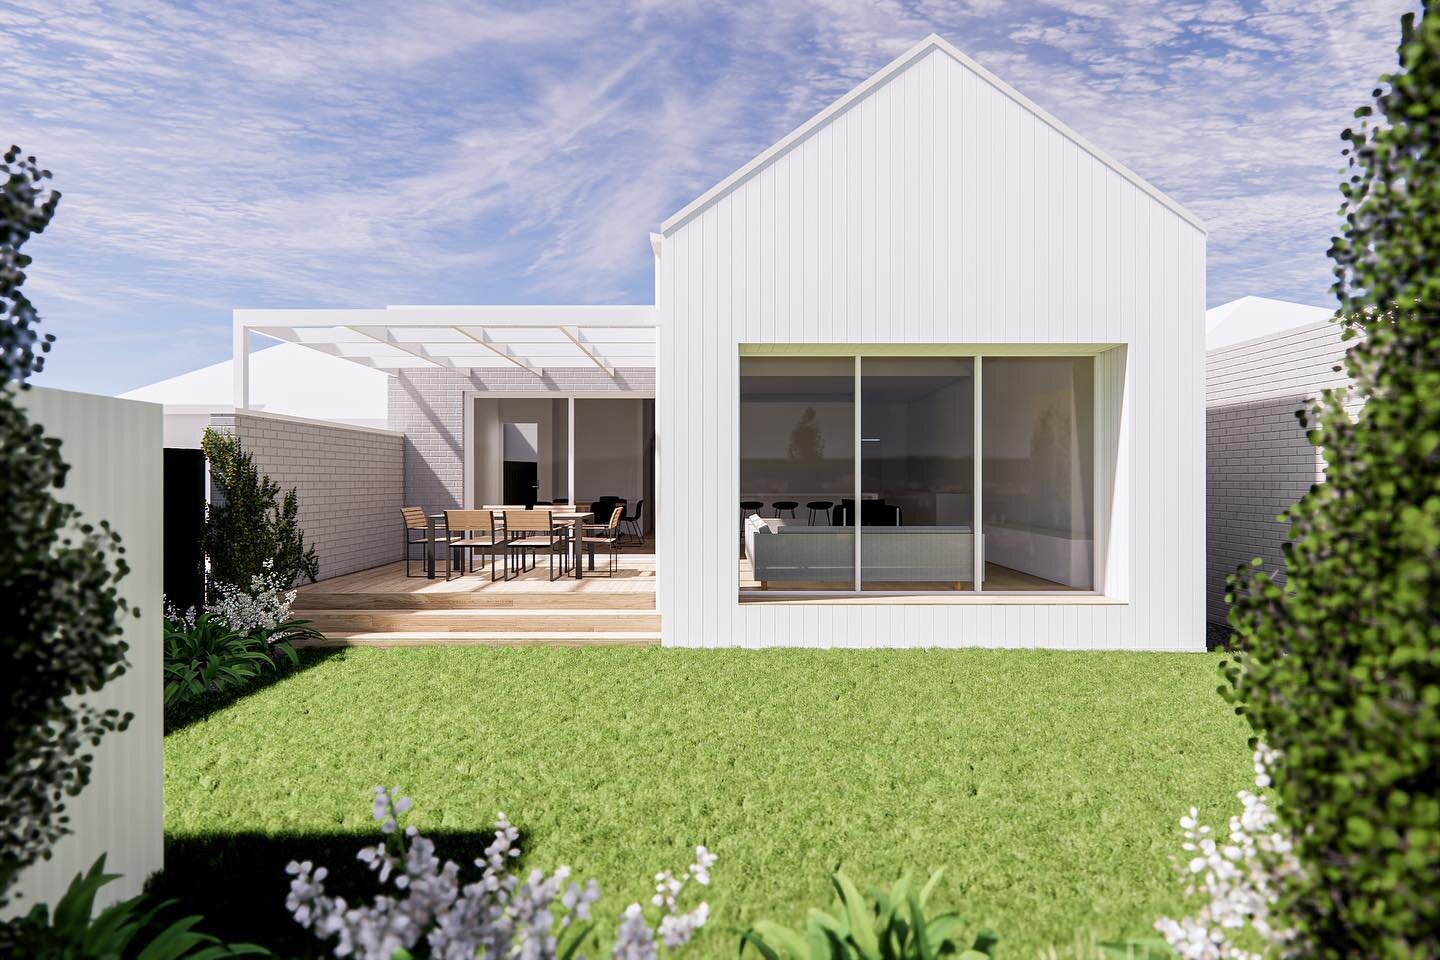 Tooronga House - Concept

One of our latest concepts the Tooronga House is well underway. 

A contemporary single storey addition to a semi-detached interwar dwelling. The addition is to add some space to the modest footprint of this home to suit its